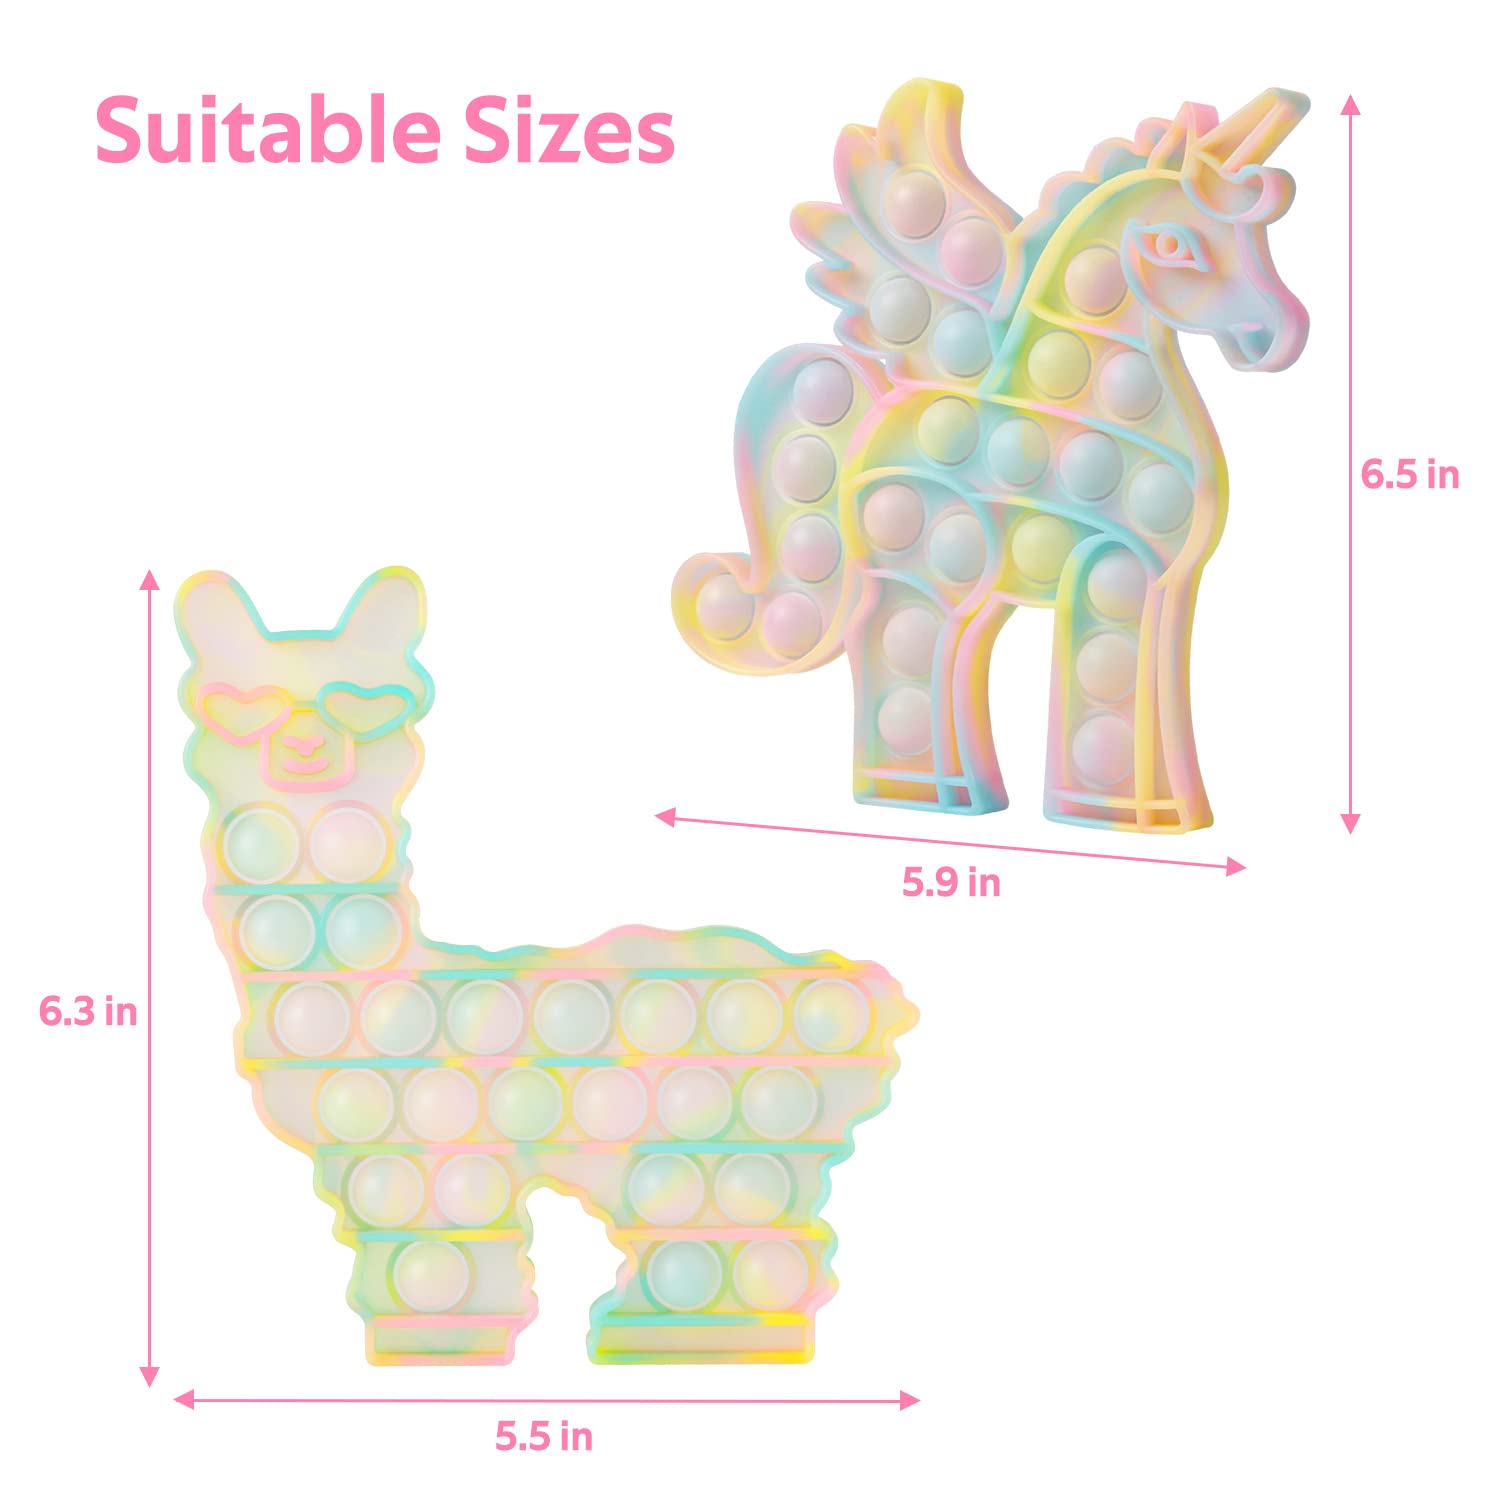 WHATOOK POP Fidget Llama Toys its: 2pack Poppers Sensory Special Needs Stress Relief and Anti-Anxiety Silicone Squeeze Bubble Alpaca Toy Tools for Kids and Adults